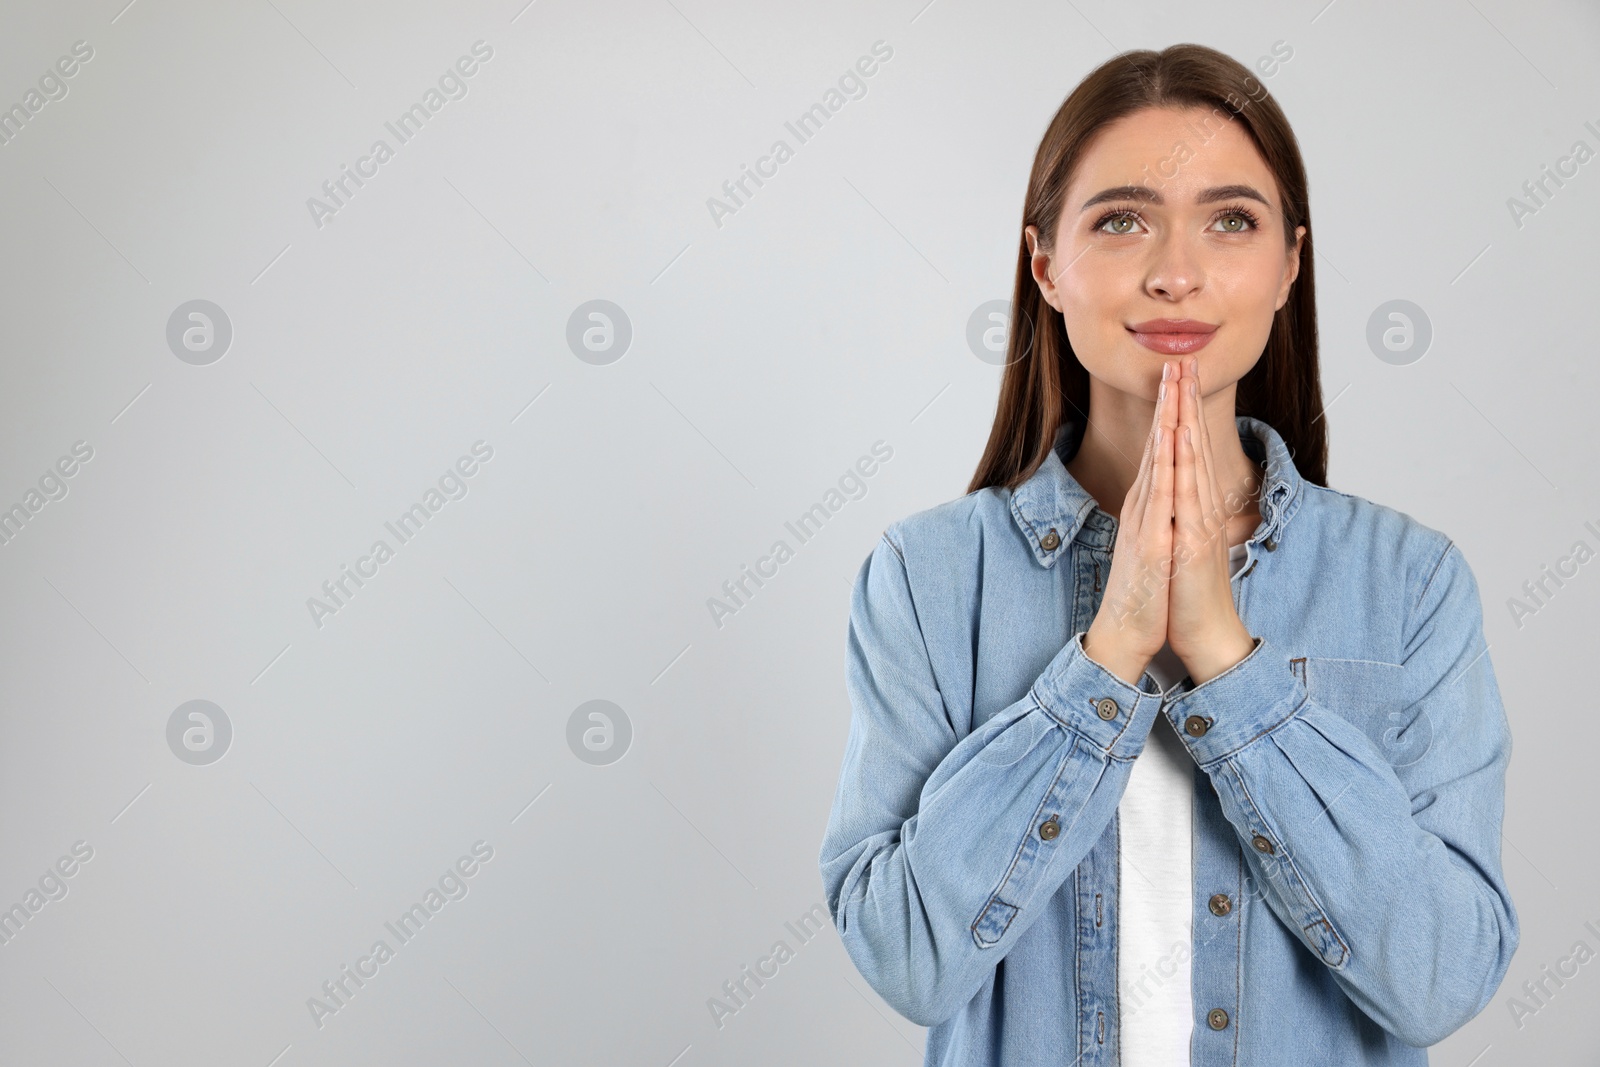 Photo of Woman with clasped hands praying on light grey background, space for text